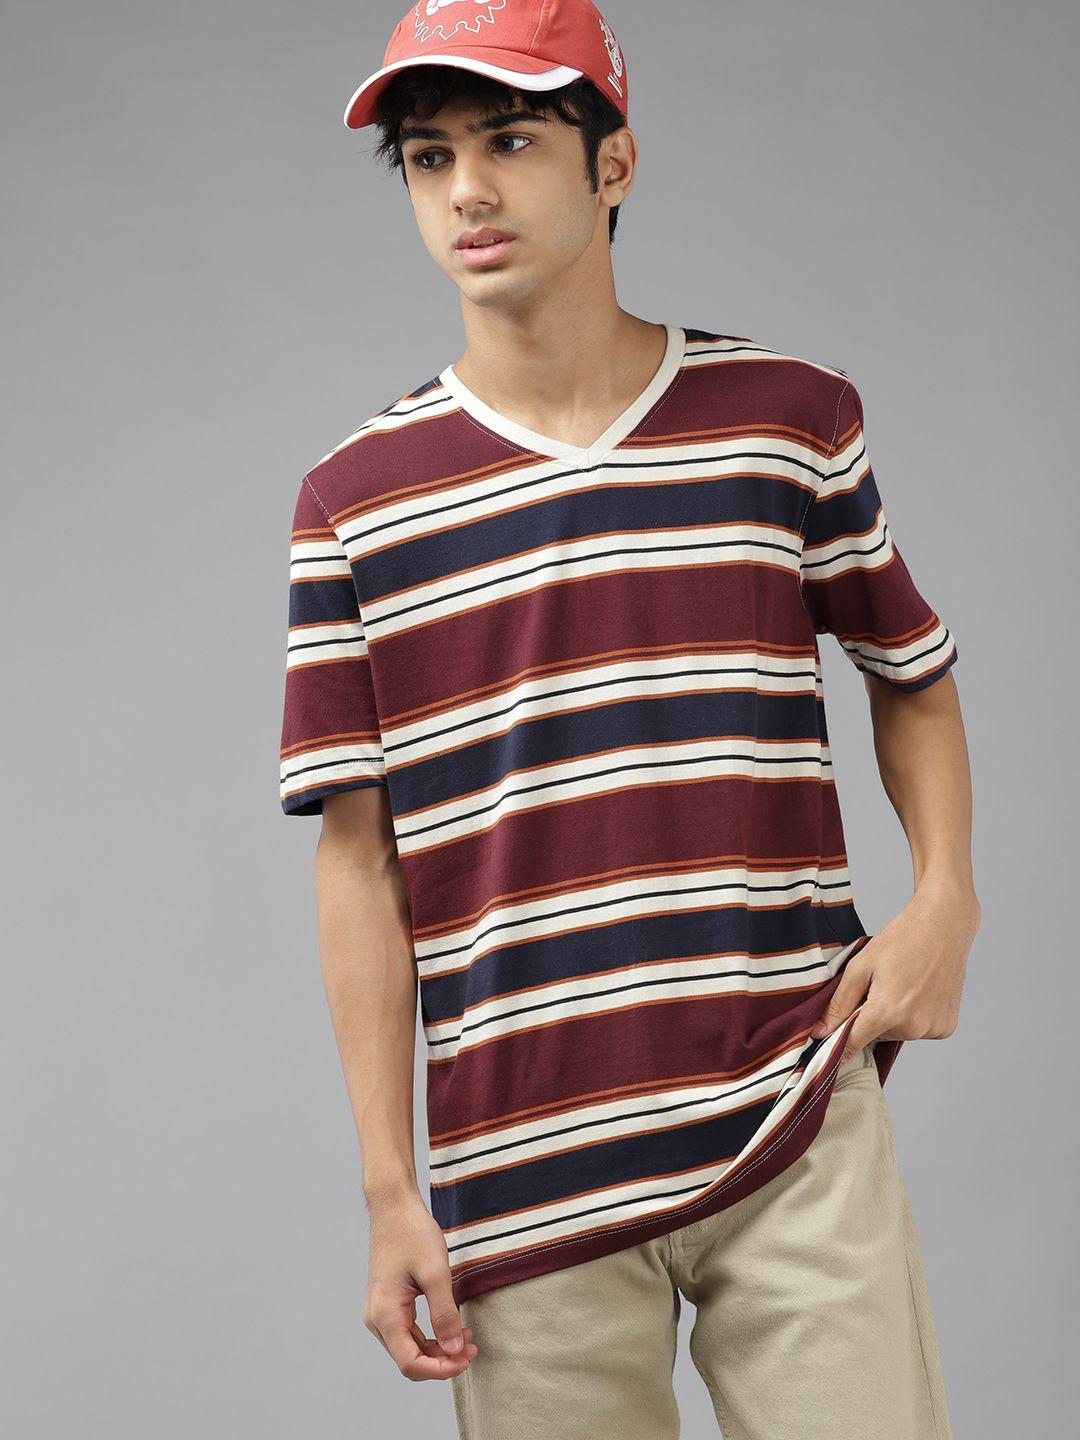 uth by roadster boys off white & maroon striped pure cotton t-shirt